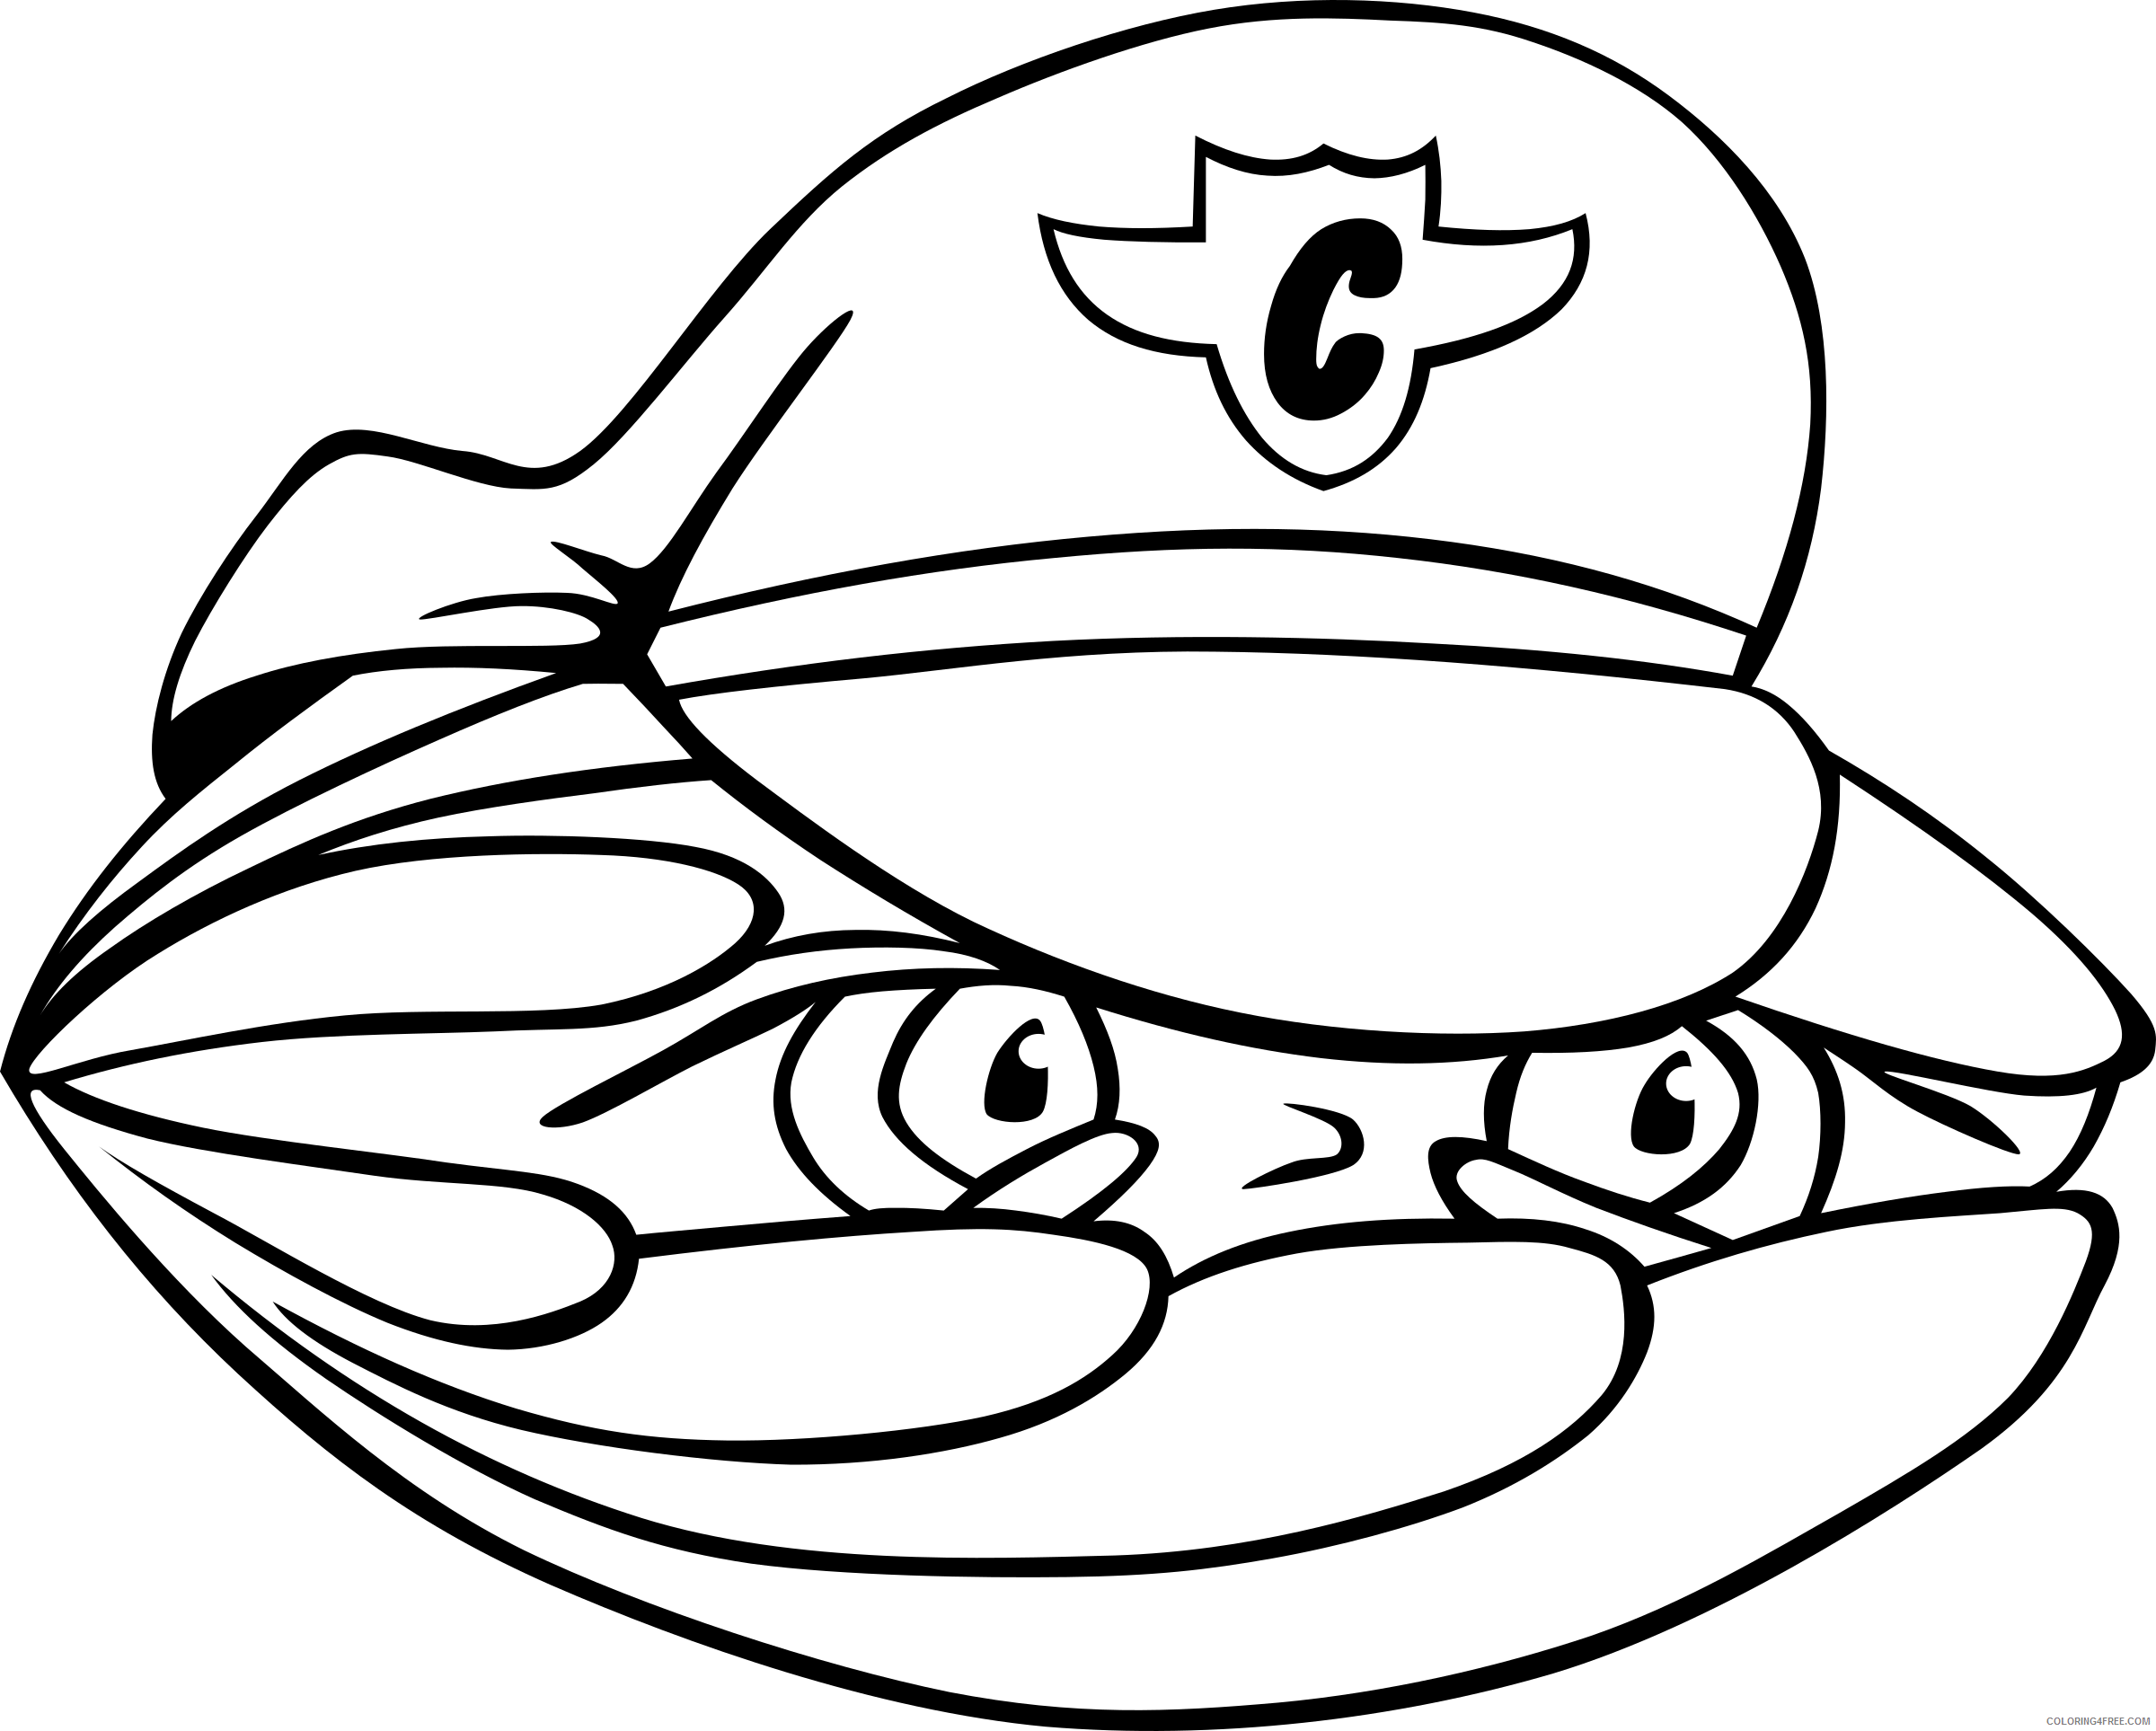 Clam Coloring Pages gerald g clam security guard Printable Coloring4free -  Coloring4Free.com